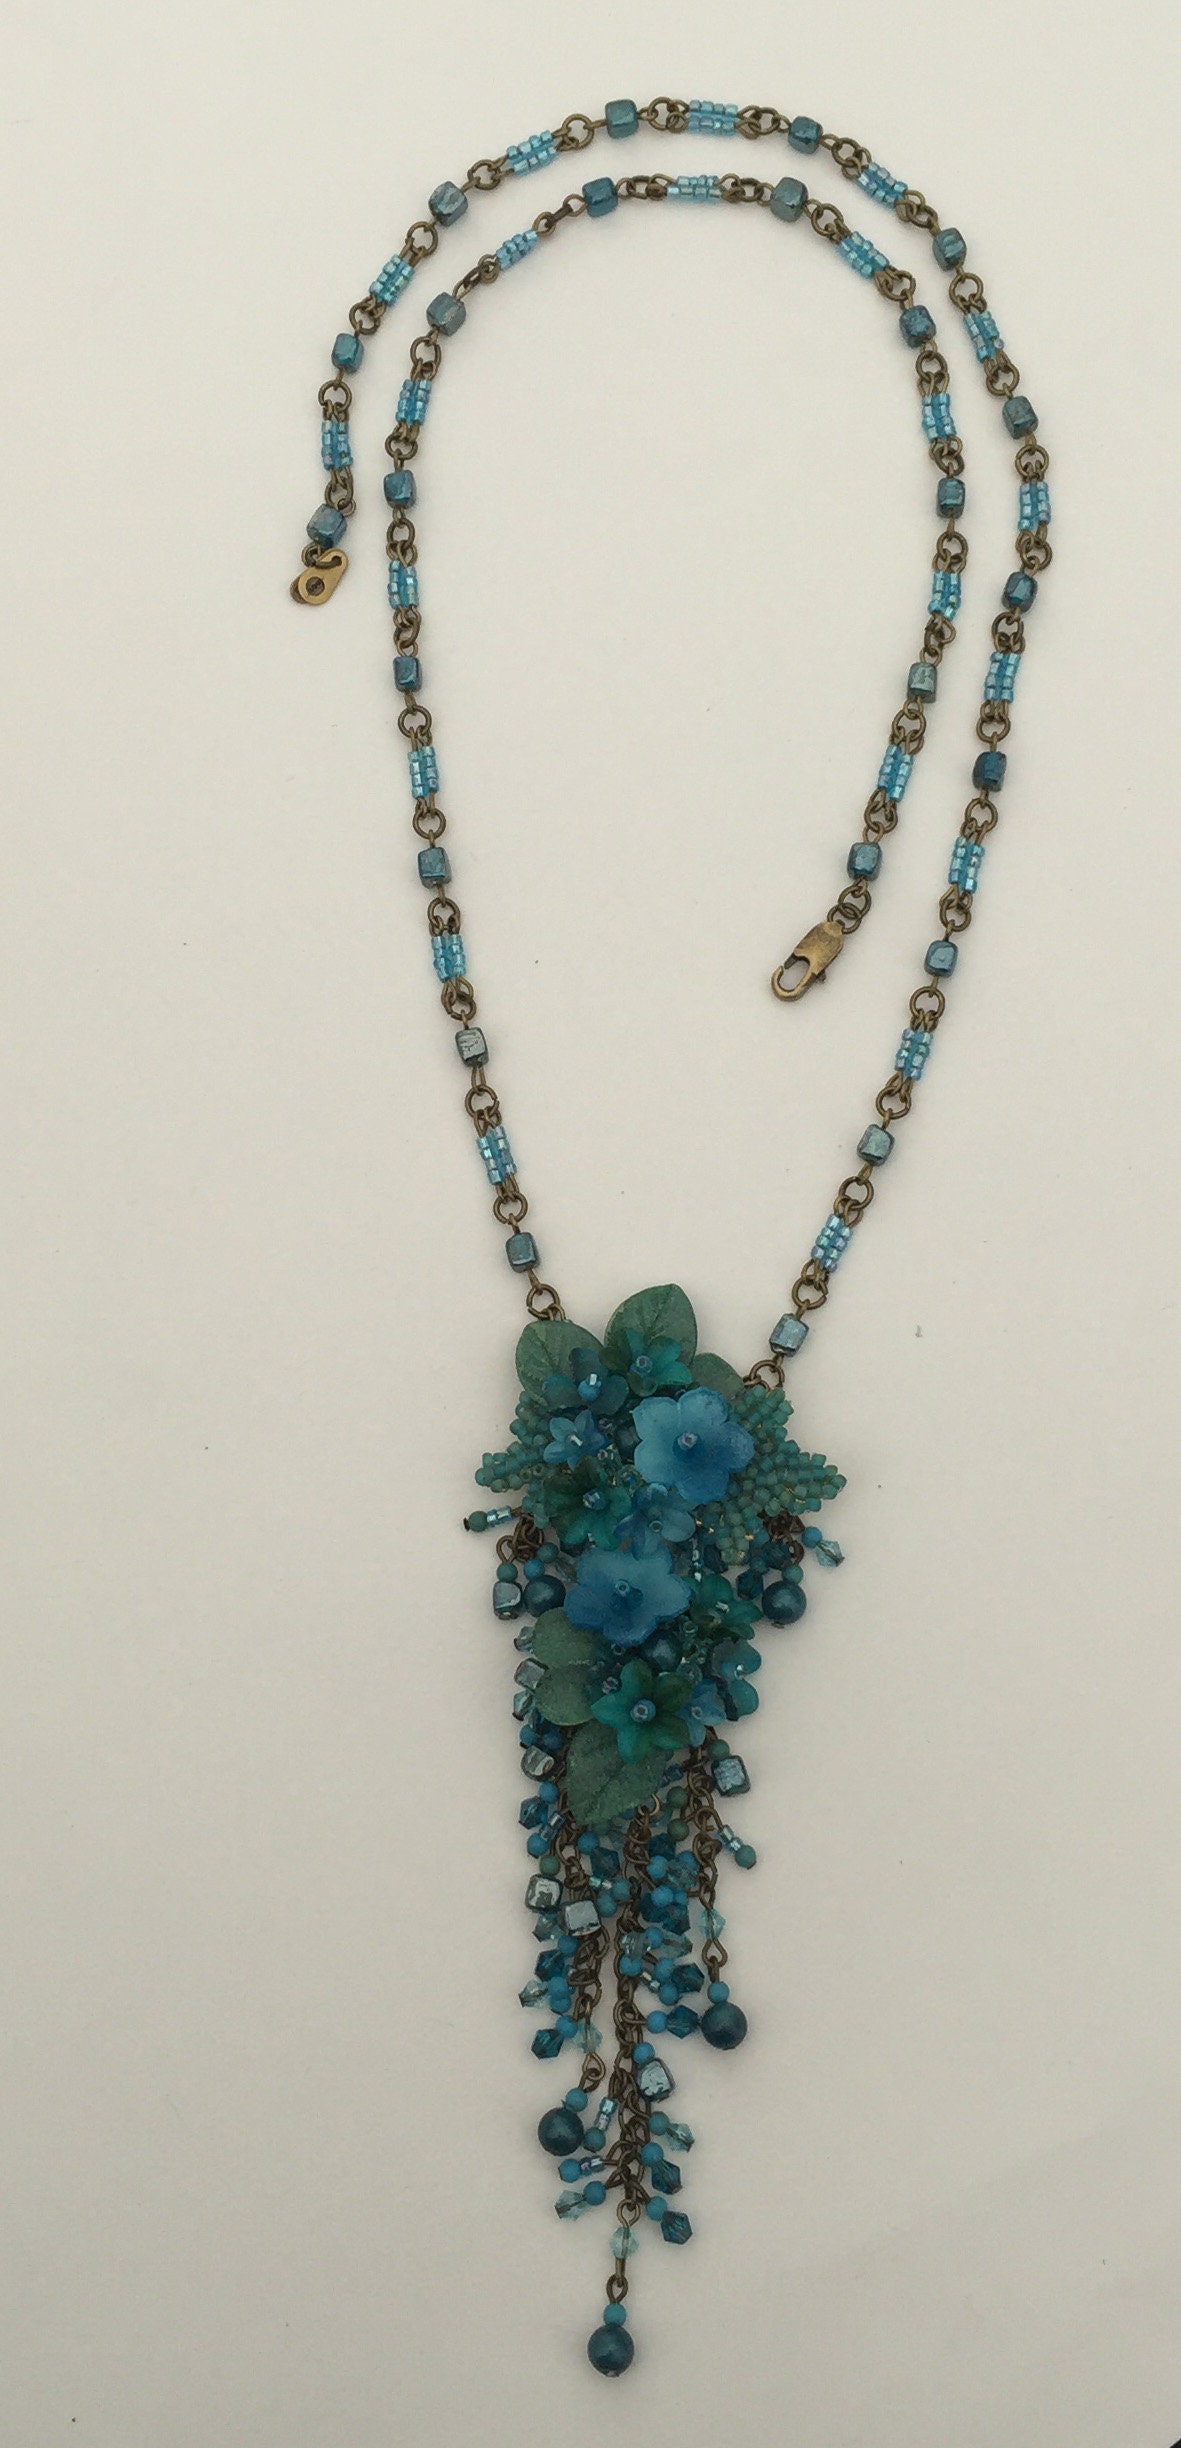 TEAL PENDANT HANDBEADED Necklace Designed by Vintage Jewelry - Etsy